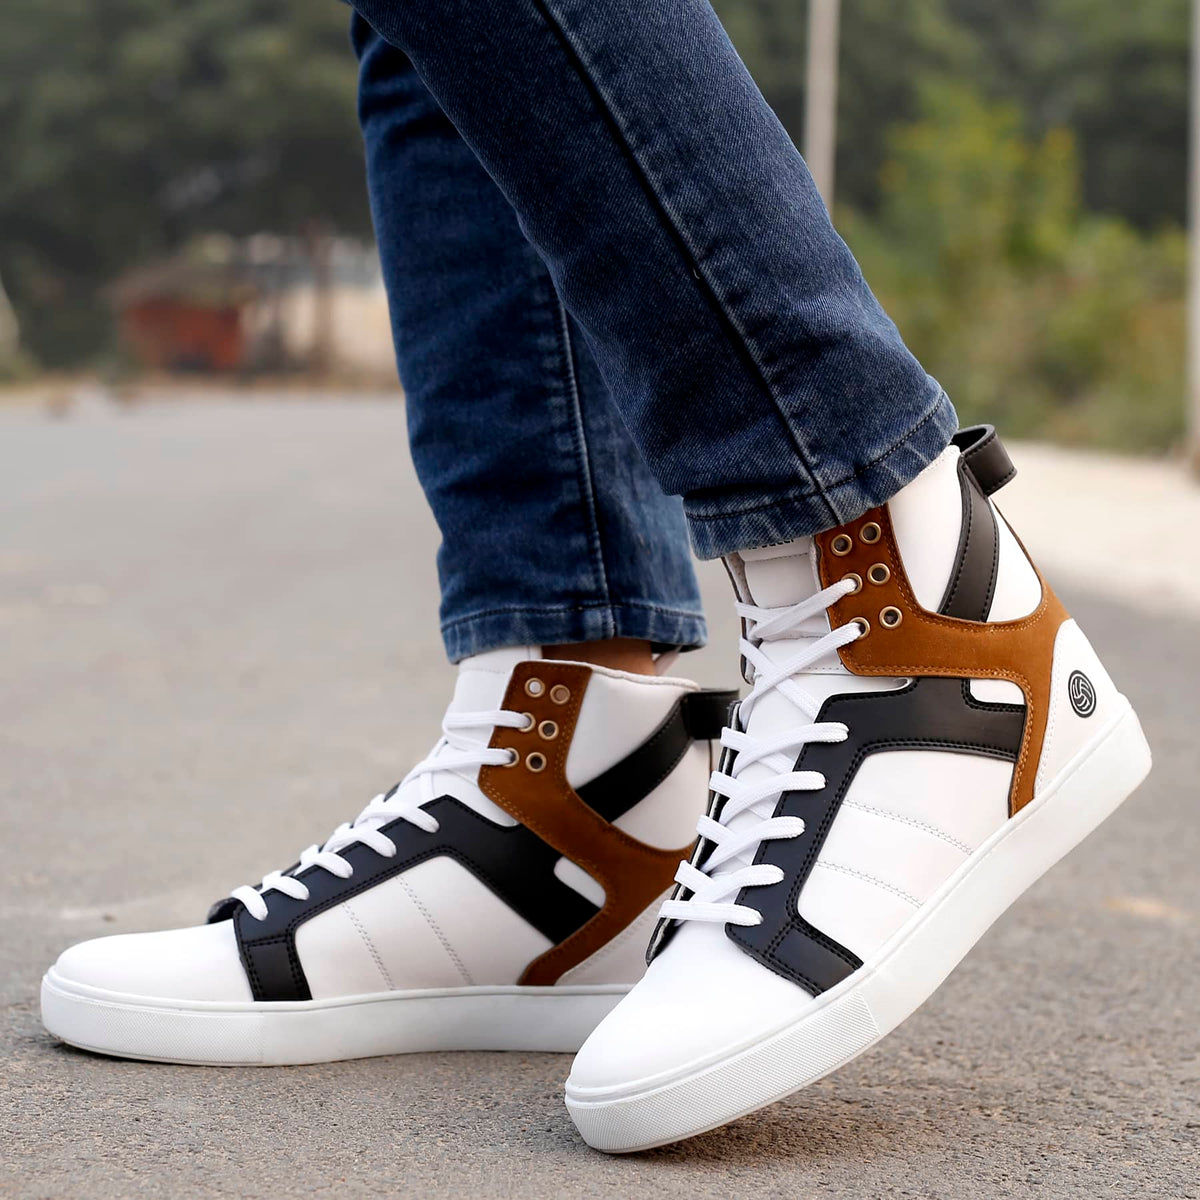 hi top ankle sneakers for men white shoes 